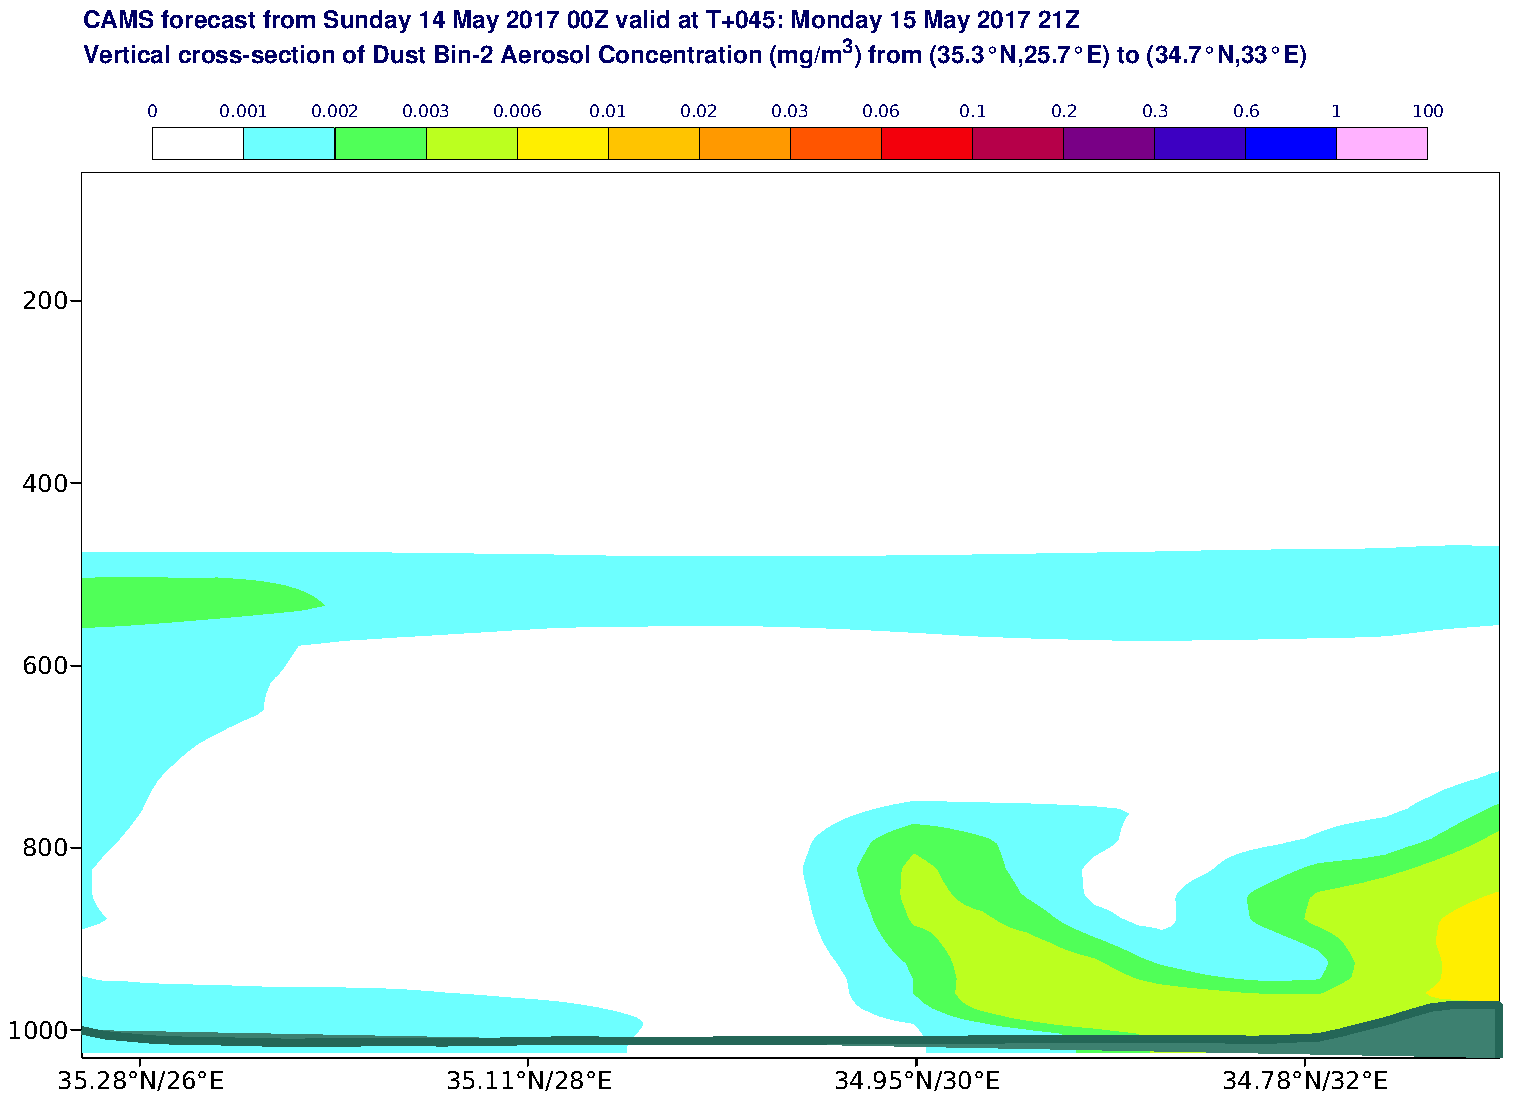 Vertical cross-section of Dust Bin-2 Aerosol Concentration (mg/m3) valid at T45 - 2017-05-15 21:00